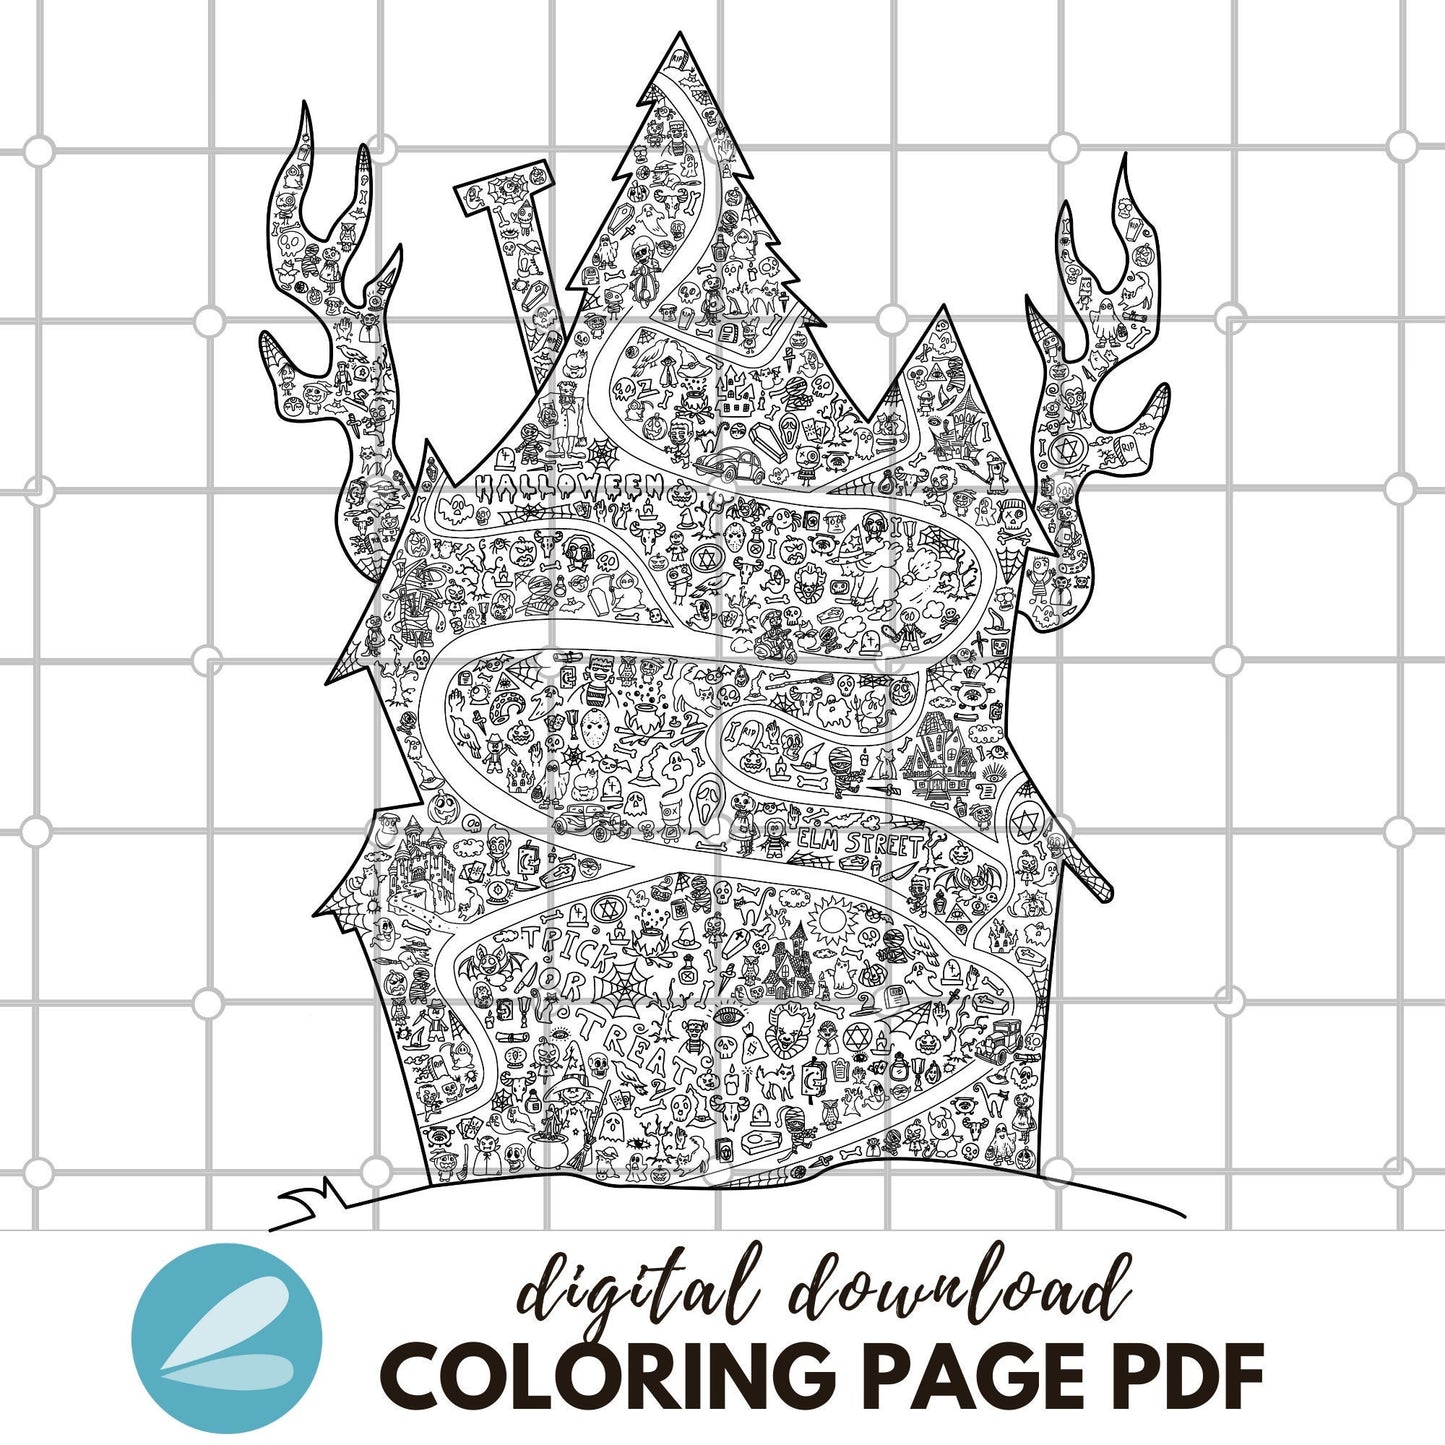 GIANT Halloween Haunted House Coloring Page - Haunted House PDF - Instant Download